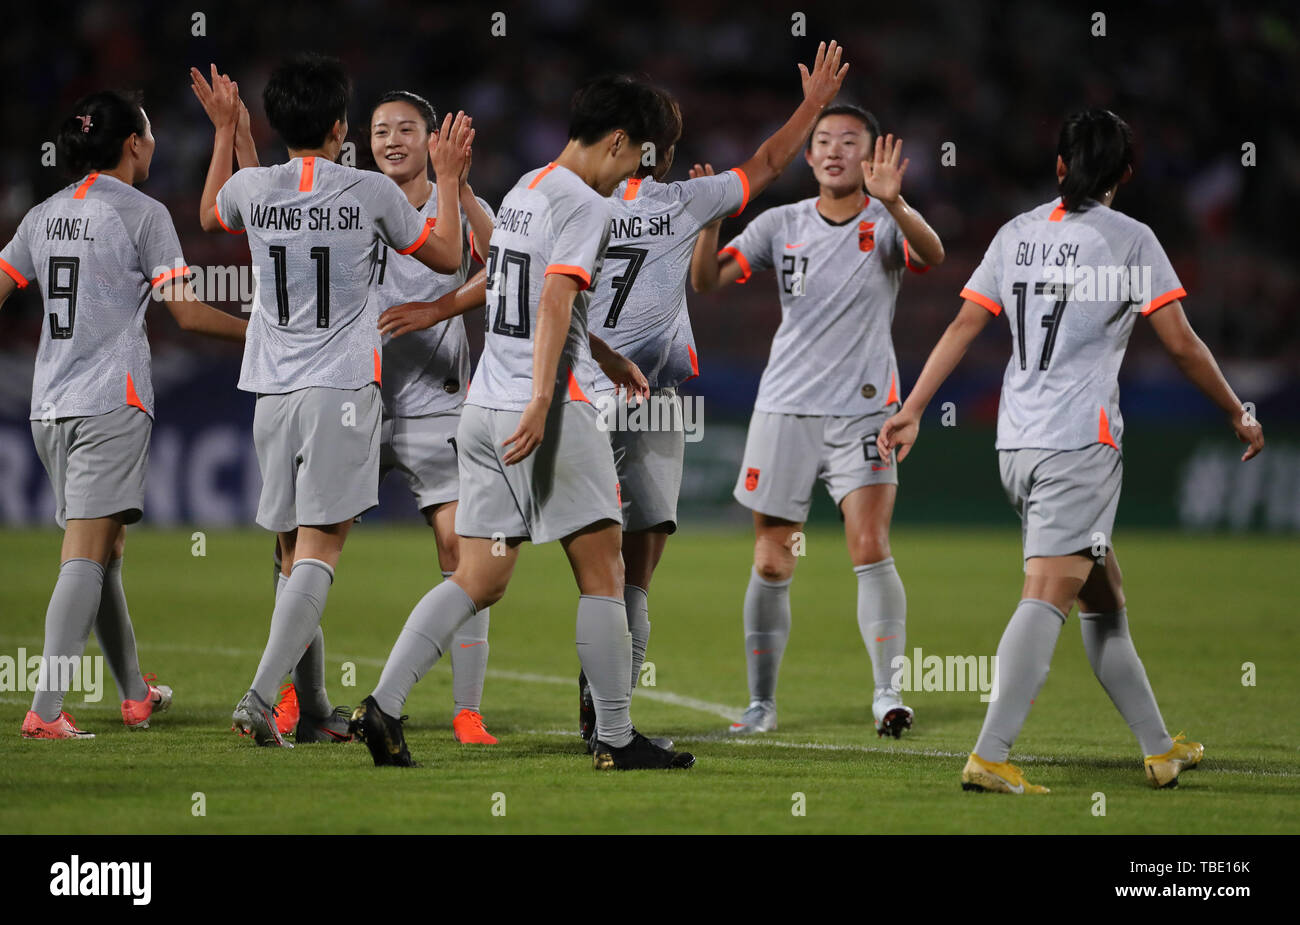 Creteil, France. 31st May, 2019. Players of China celebrates during a friendly soccer match between France and China in Creteil, France, May 31, 2019. France won 2-1. Credit: Gao Jing/Xinhua/Alamy Live News Stock Photo